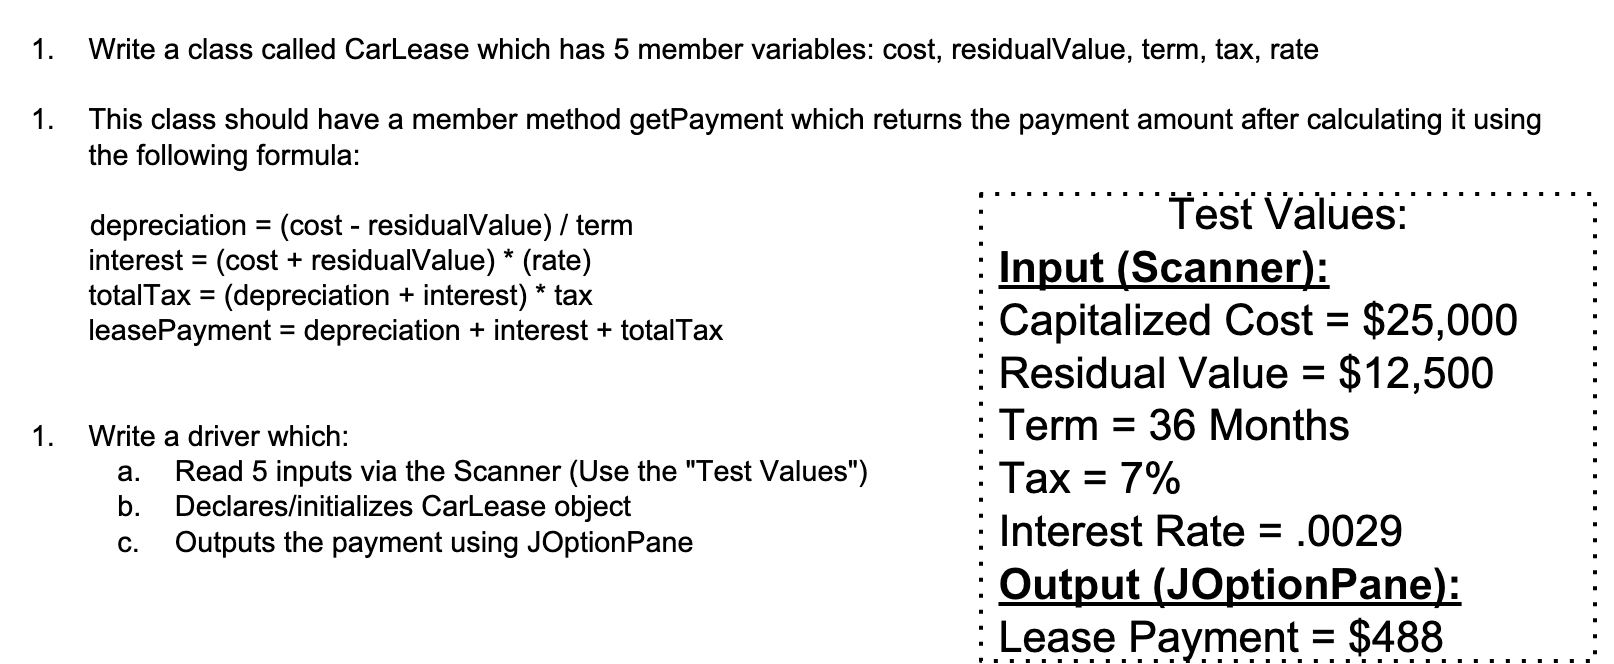 1. Write a class called CarLease which has 5 member variables: cost, residualValue, term, tax, rate This